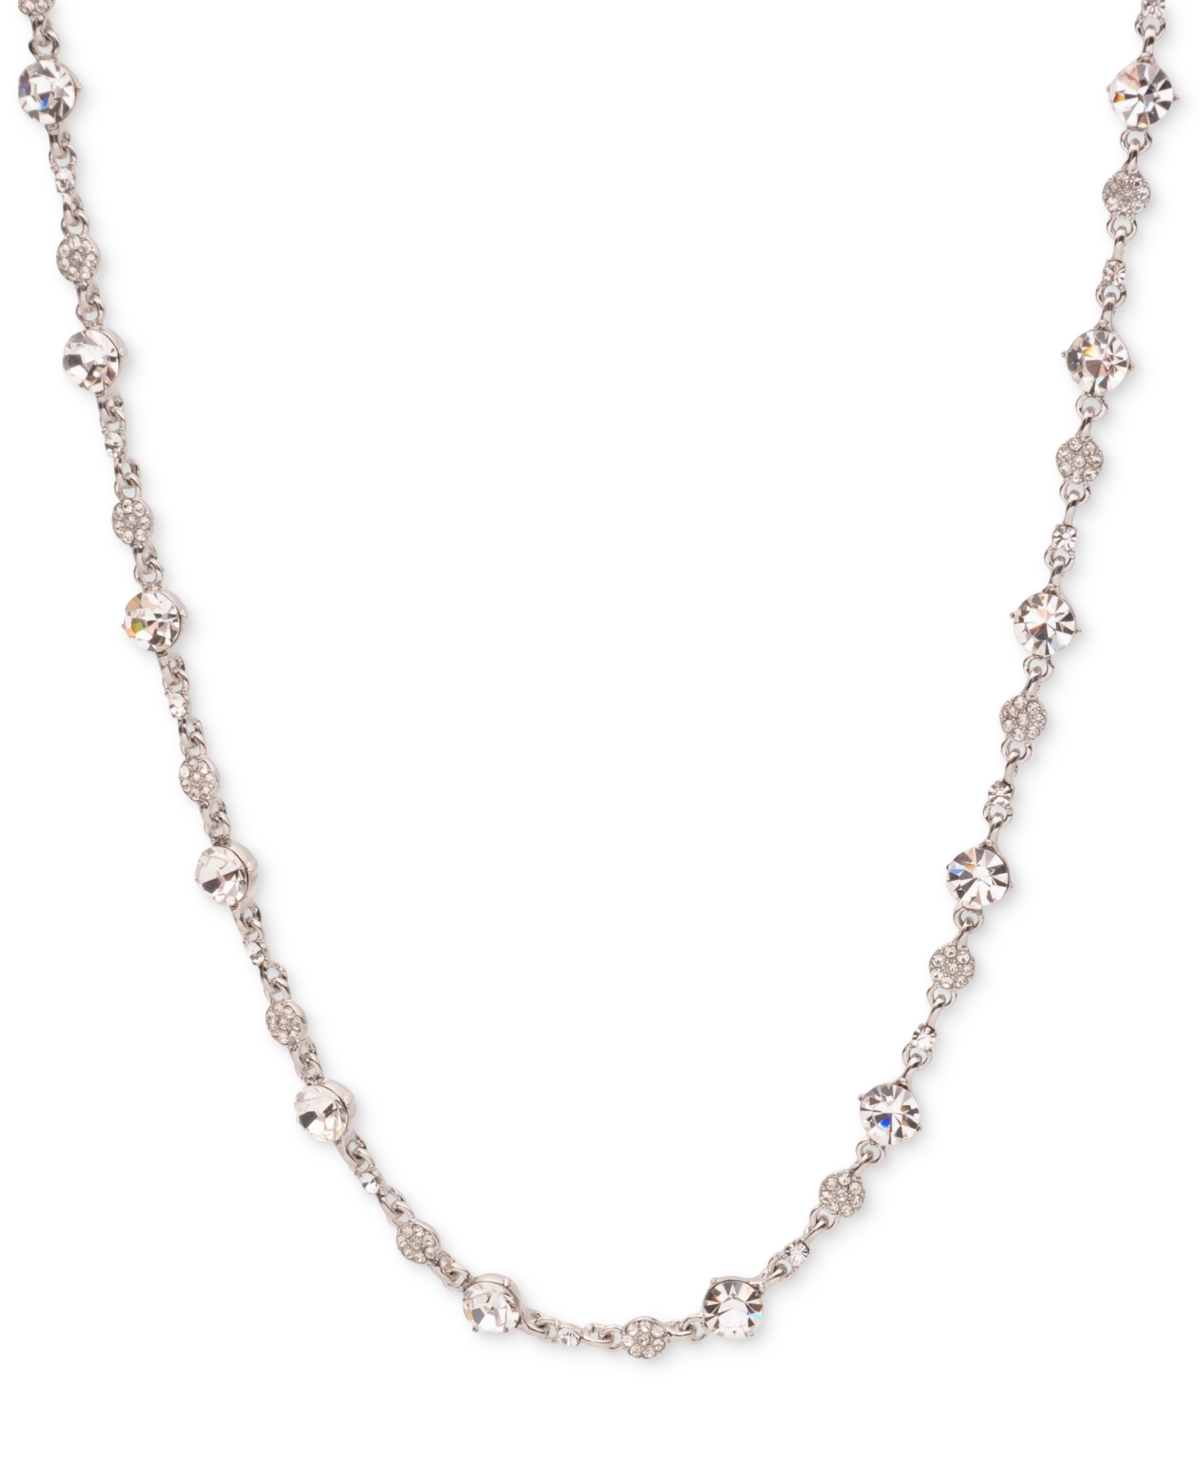 Crystal Pave Collar Necklace, 16" + 3" extender - White